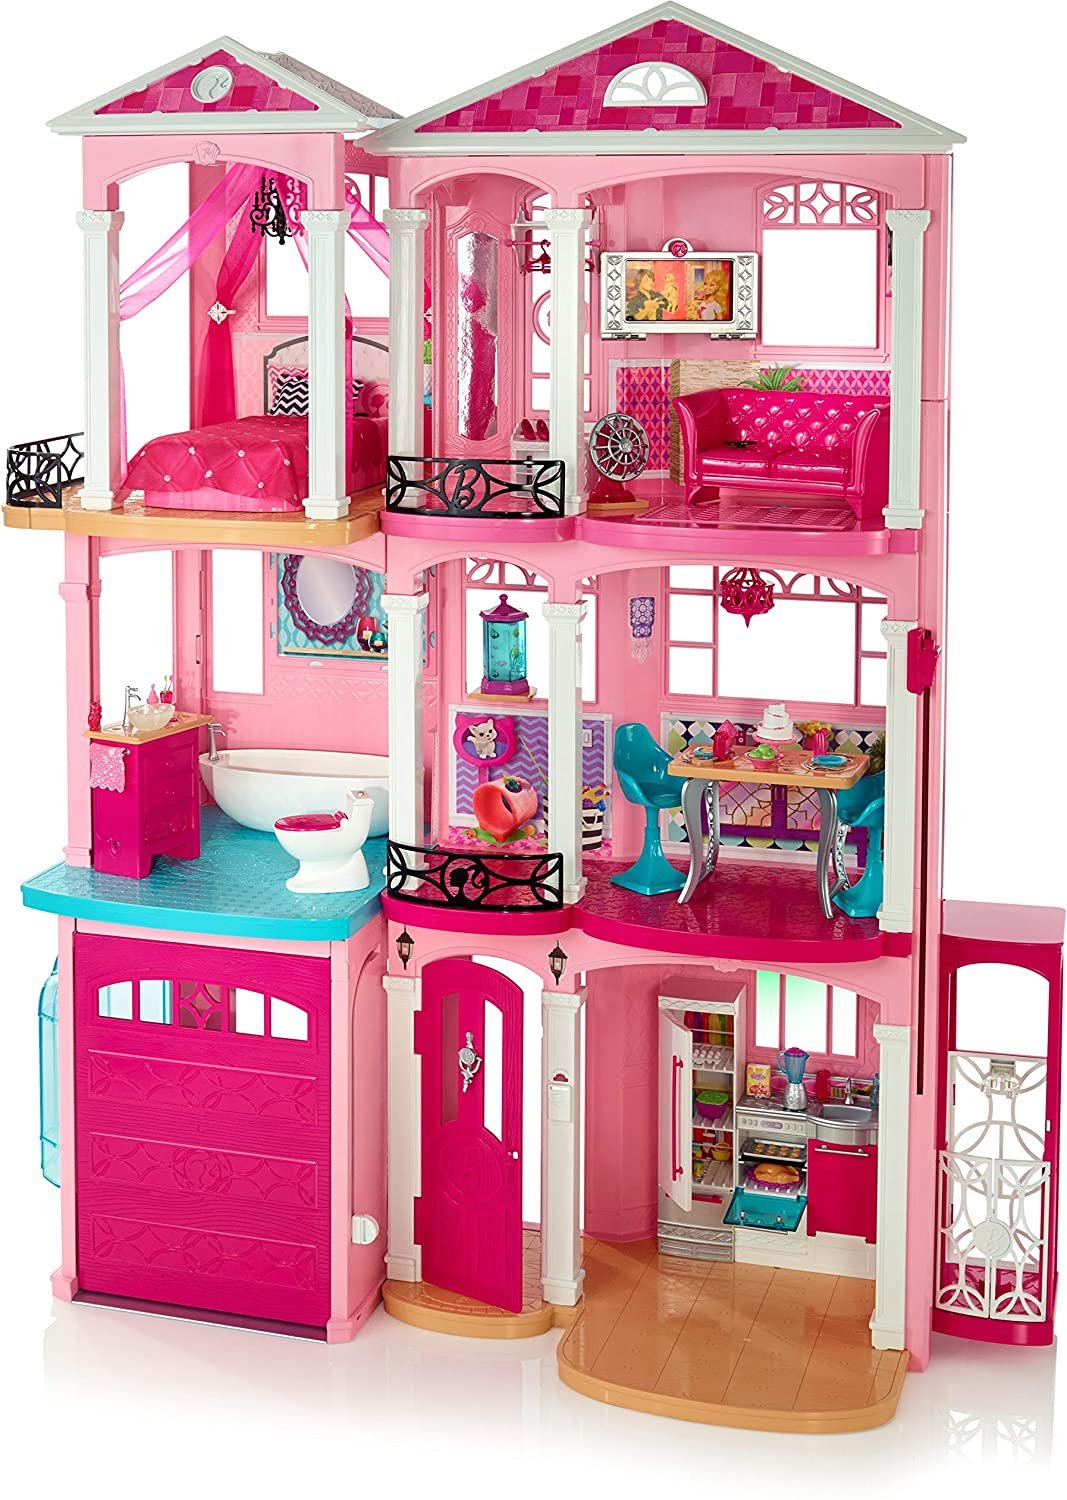 New Mattel Barbie 3 Story Pink Furnished Doll Town house Dreamhouse ...